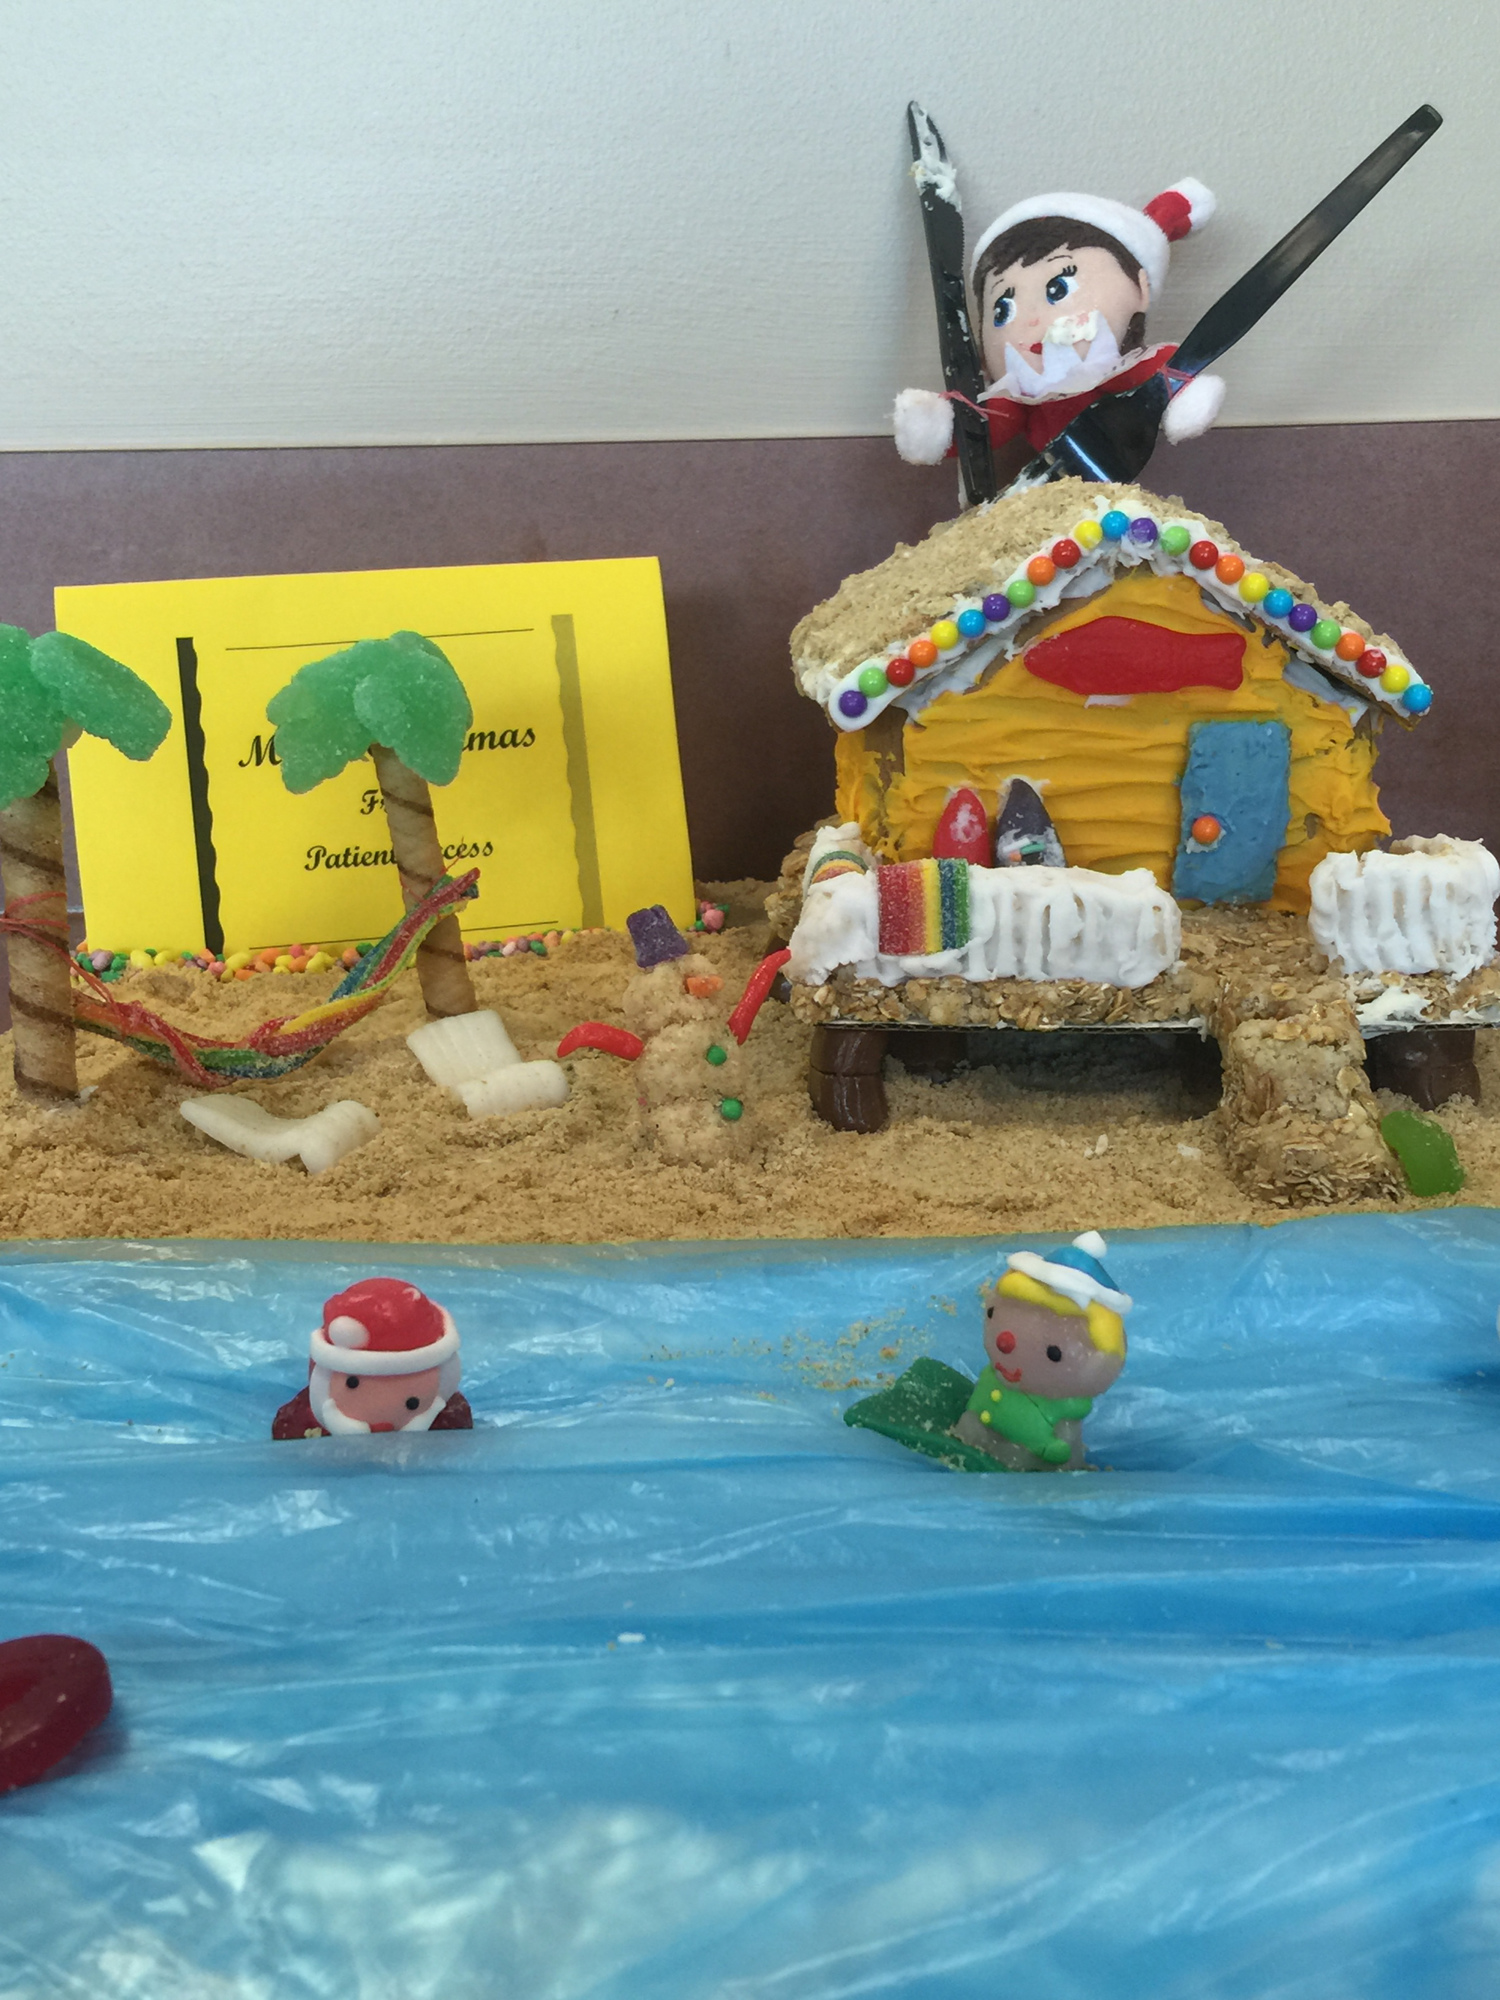 Patient Access designers Robin Weaver and Lisa Wilkes designed a beach scene with an Elf on a Shelf digging into a cottage. The two-woman team won first place.